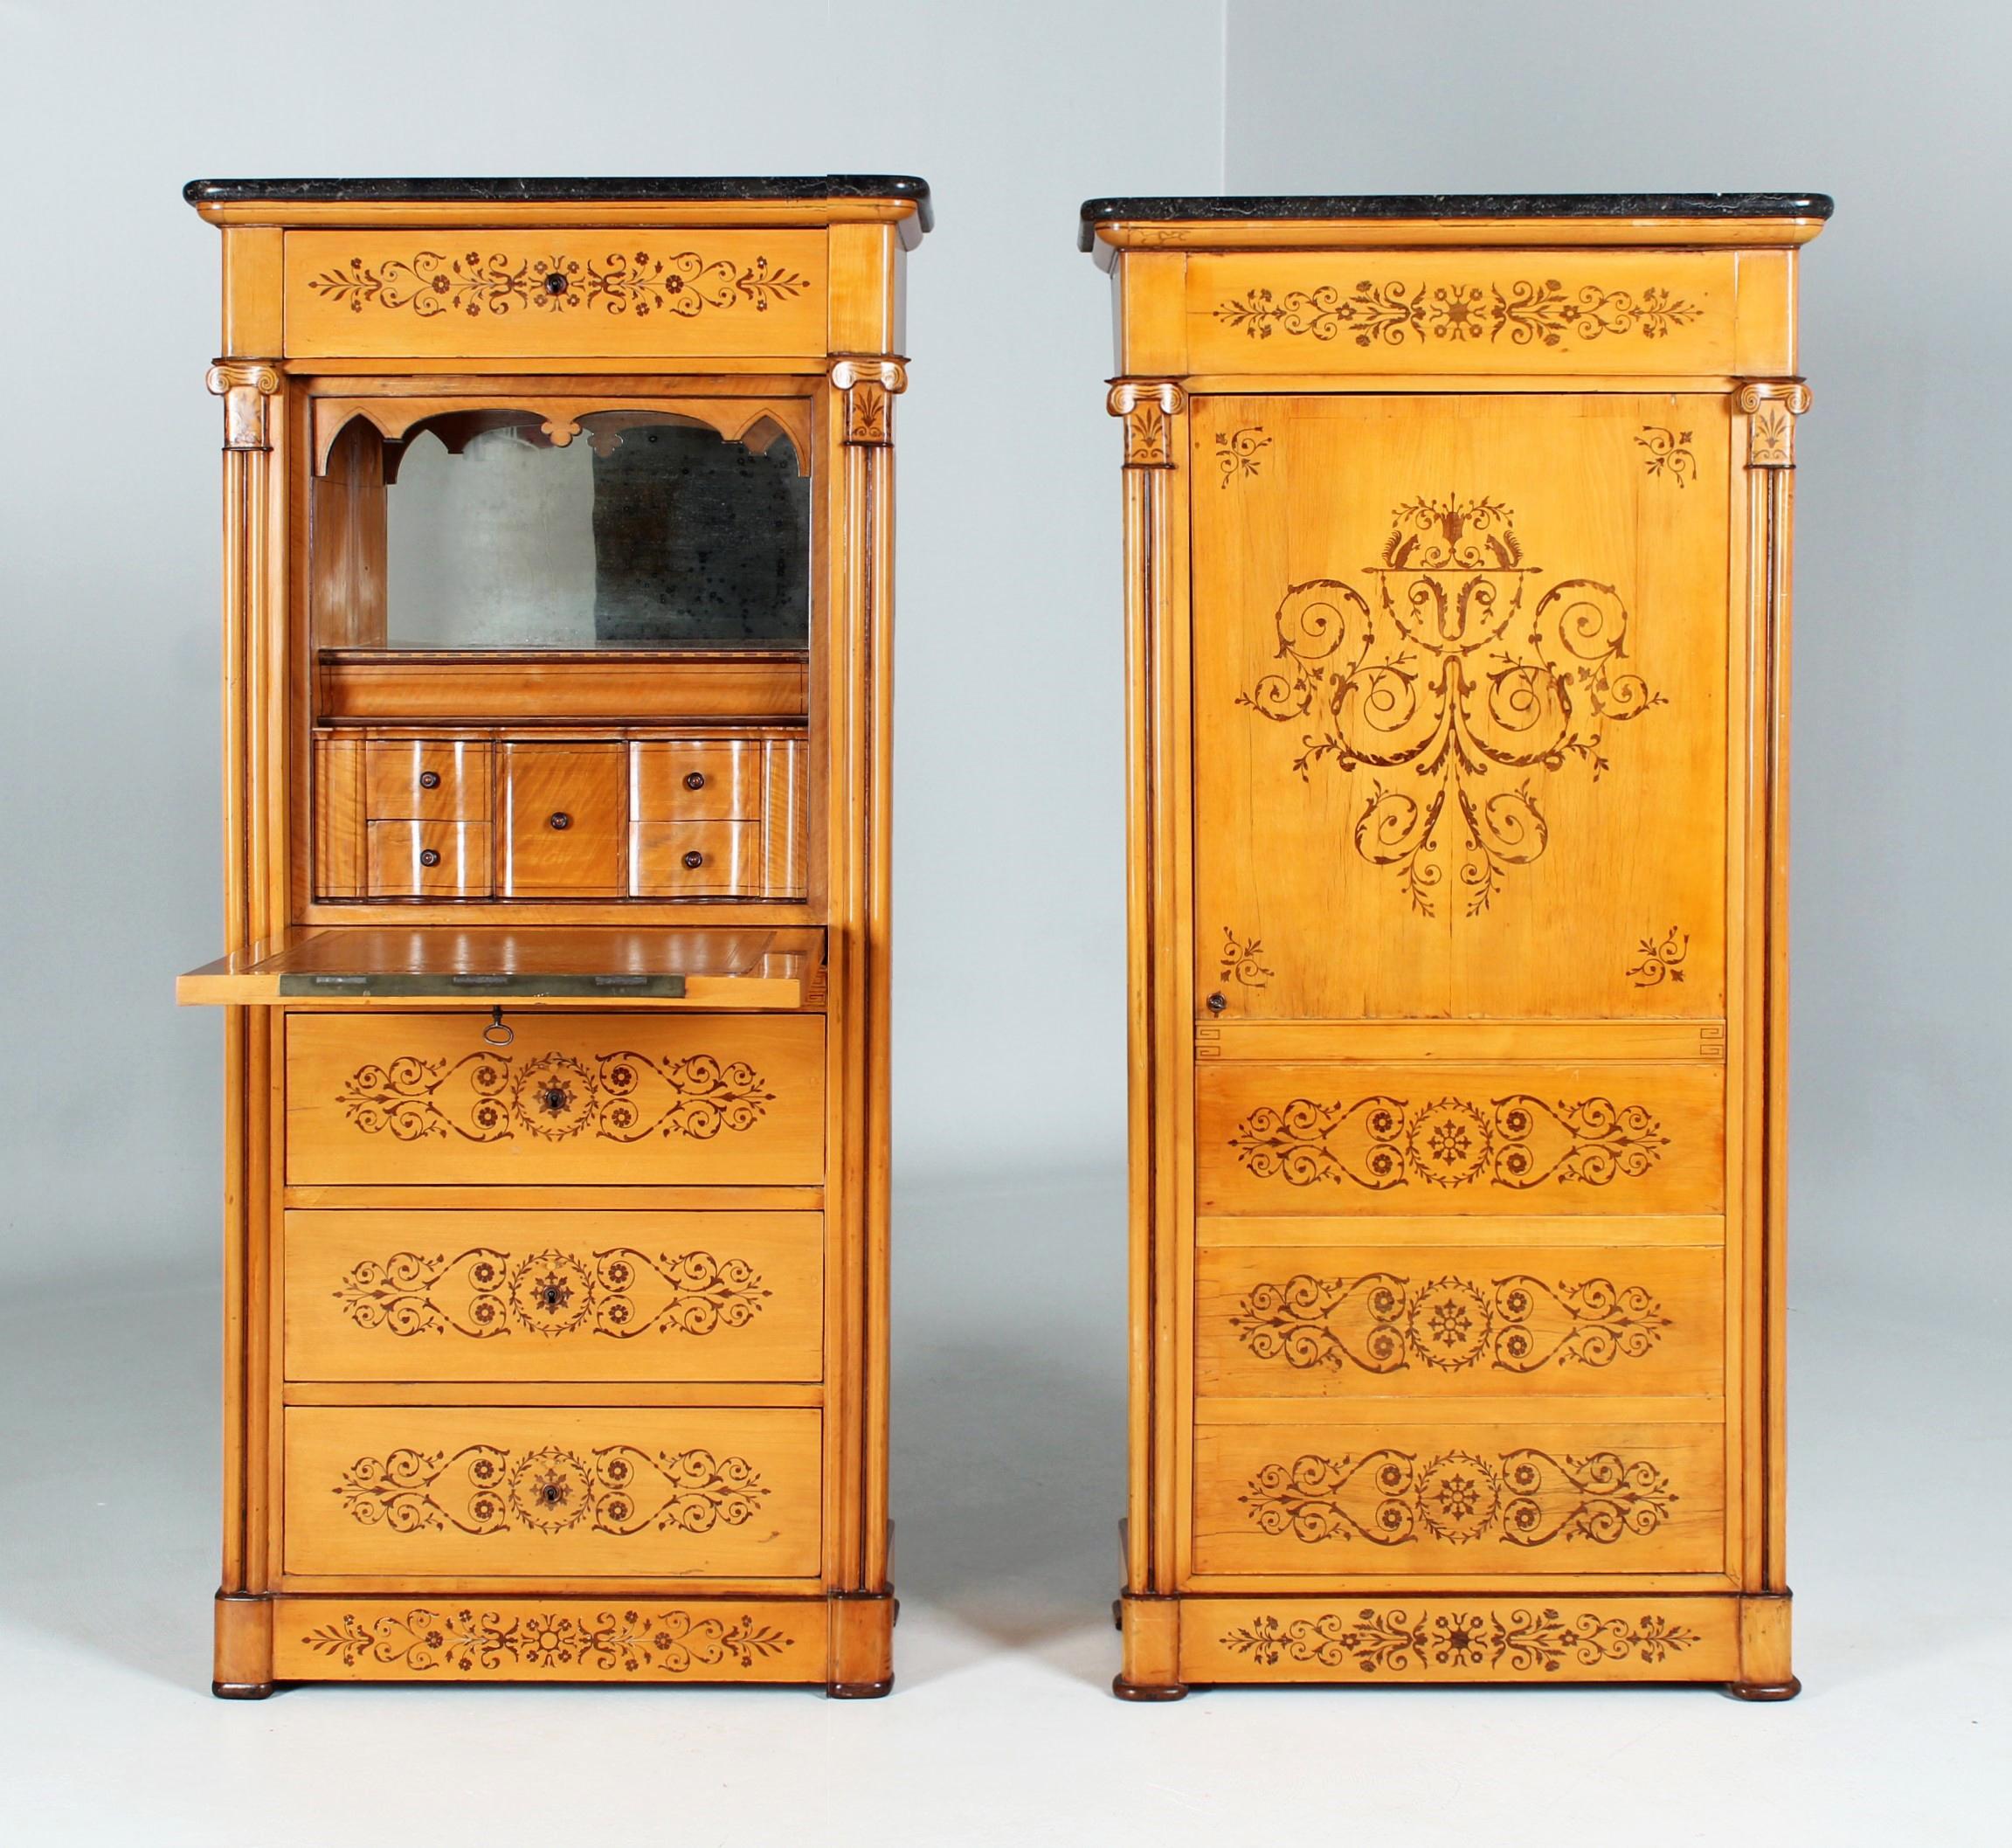 Rare pair of furniture - secretary and fronted cabinet

France
Maple, rosewood
Charles X around 1830

Dimensions: H x W x D: 135 x 66 x 33 cm

Description:
Extremely rare pair of furniture in impressively high craftsmanship quality.
When closed, we